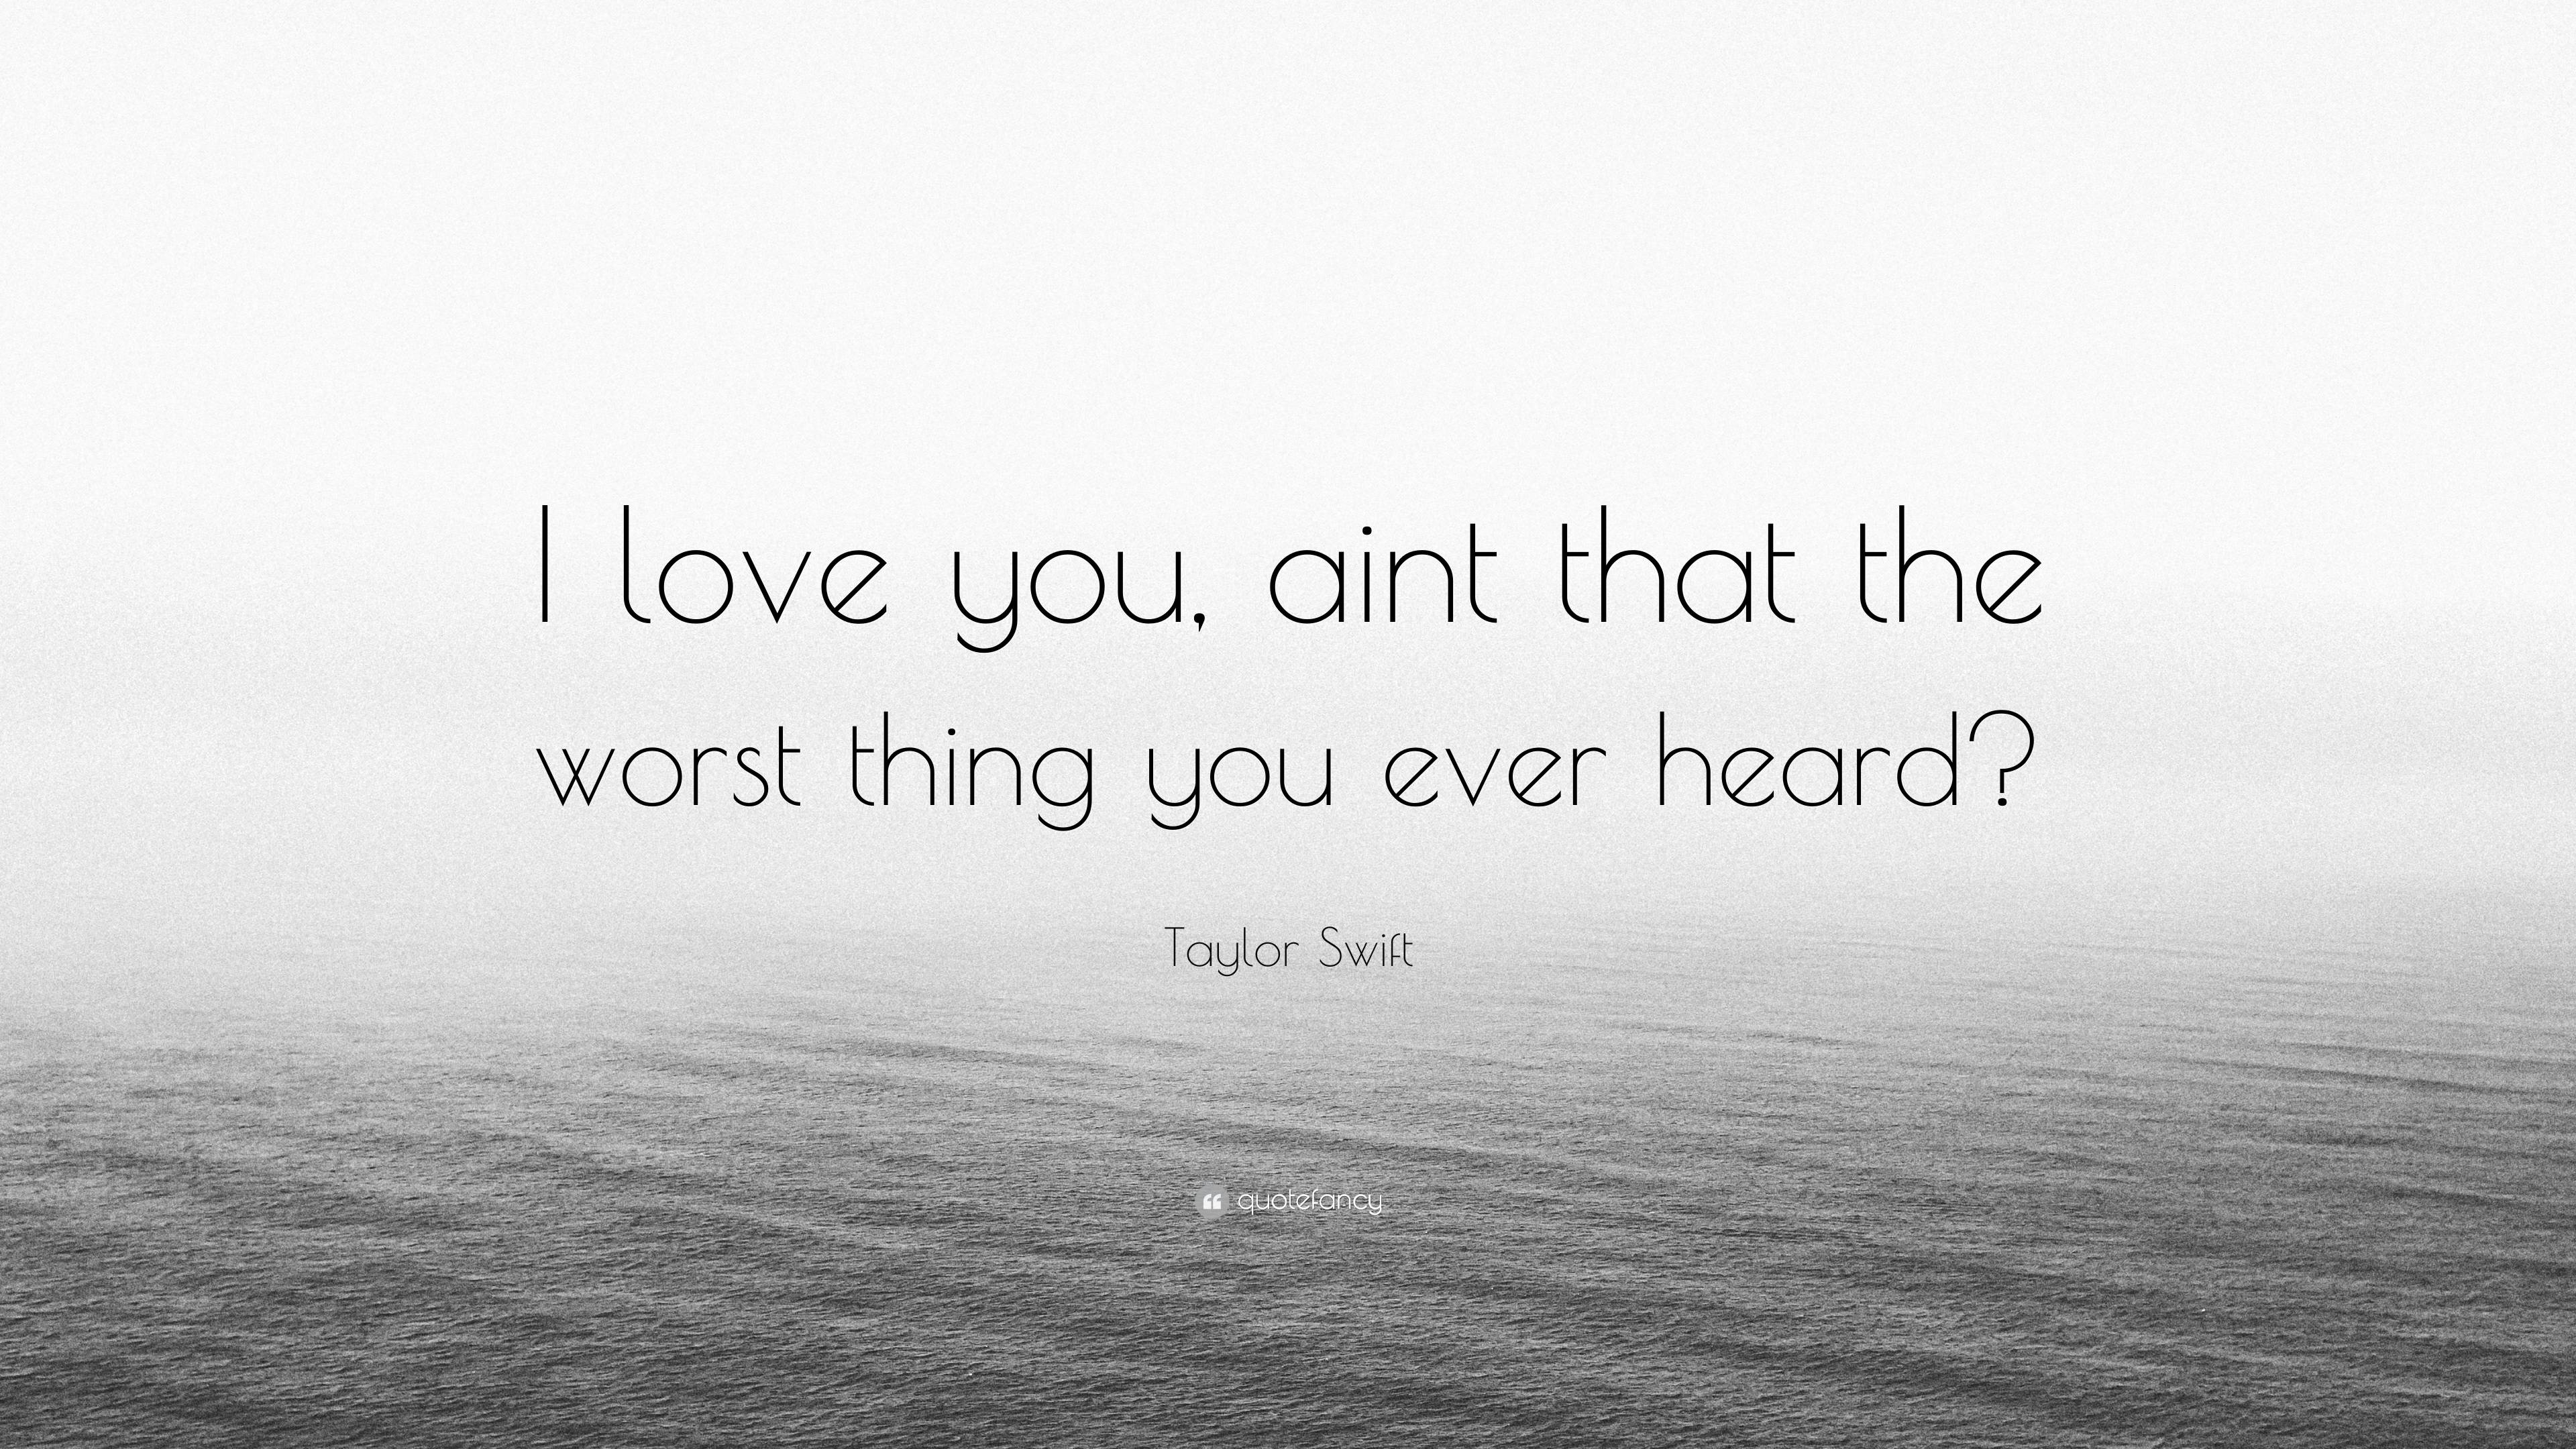 Taylor Swift Quote: “I love you, aint that the worst thing you ever heard?”